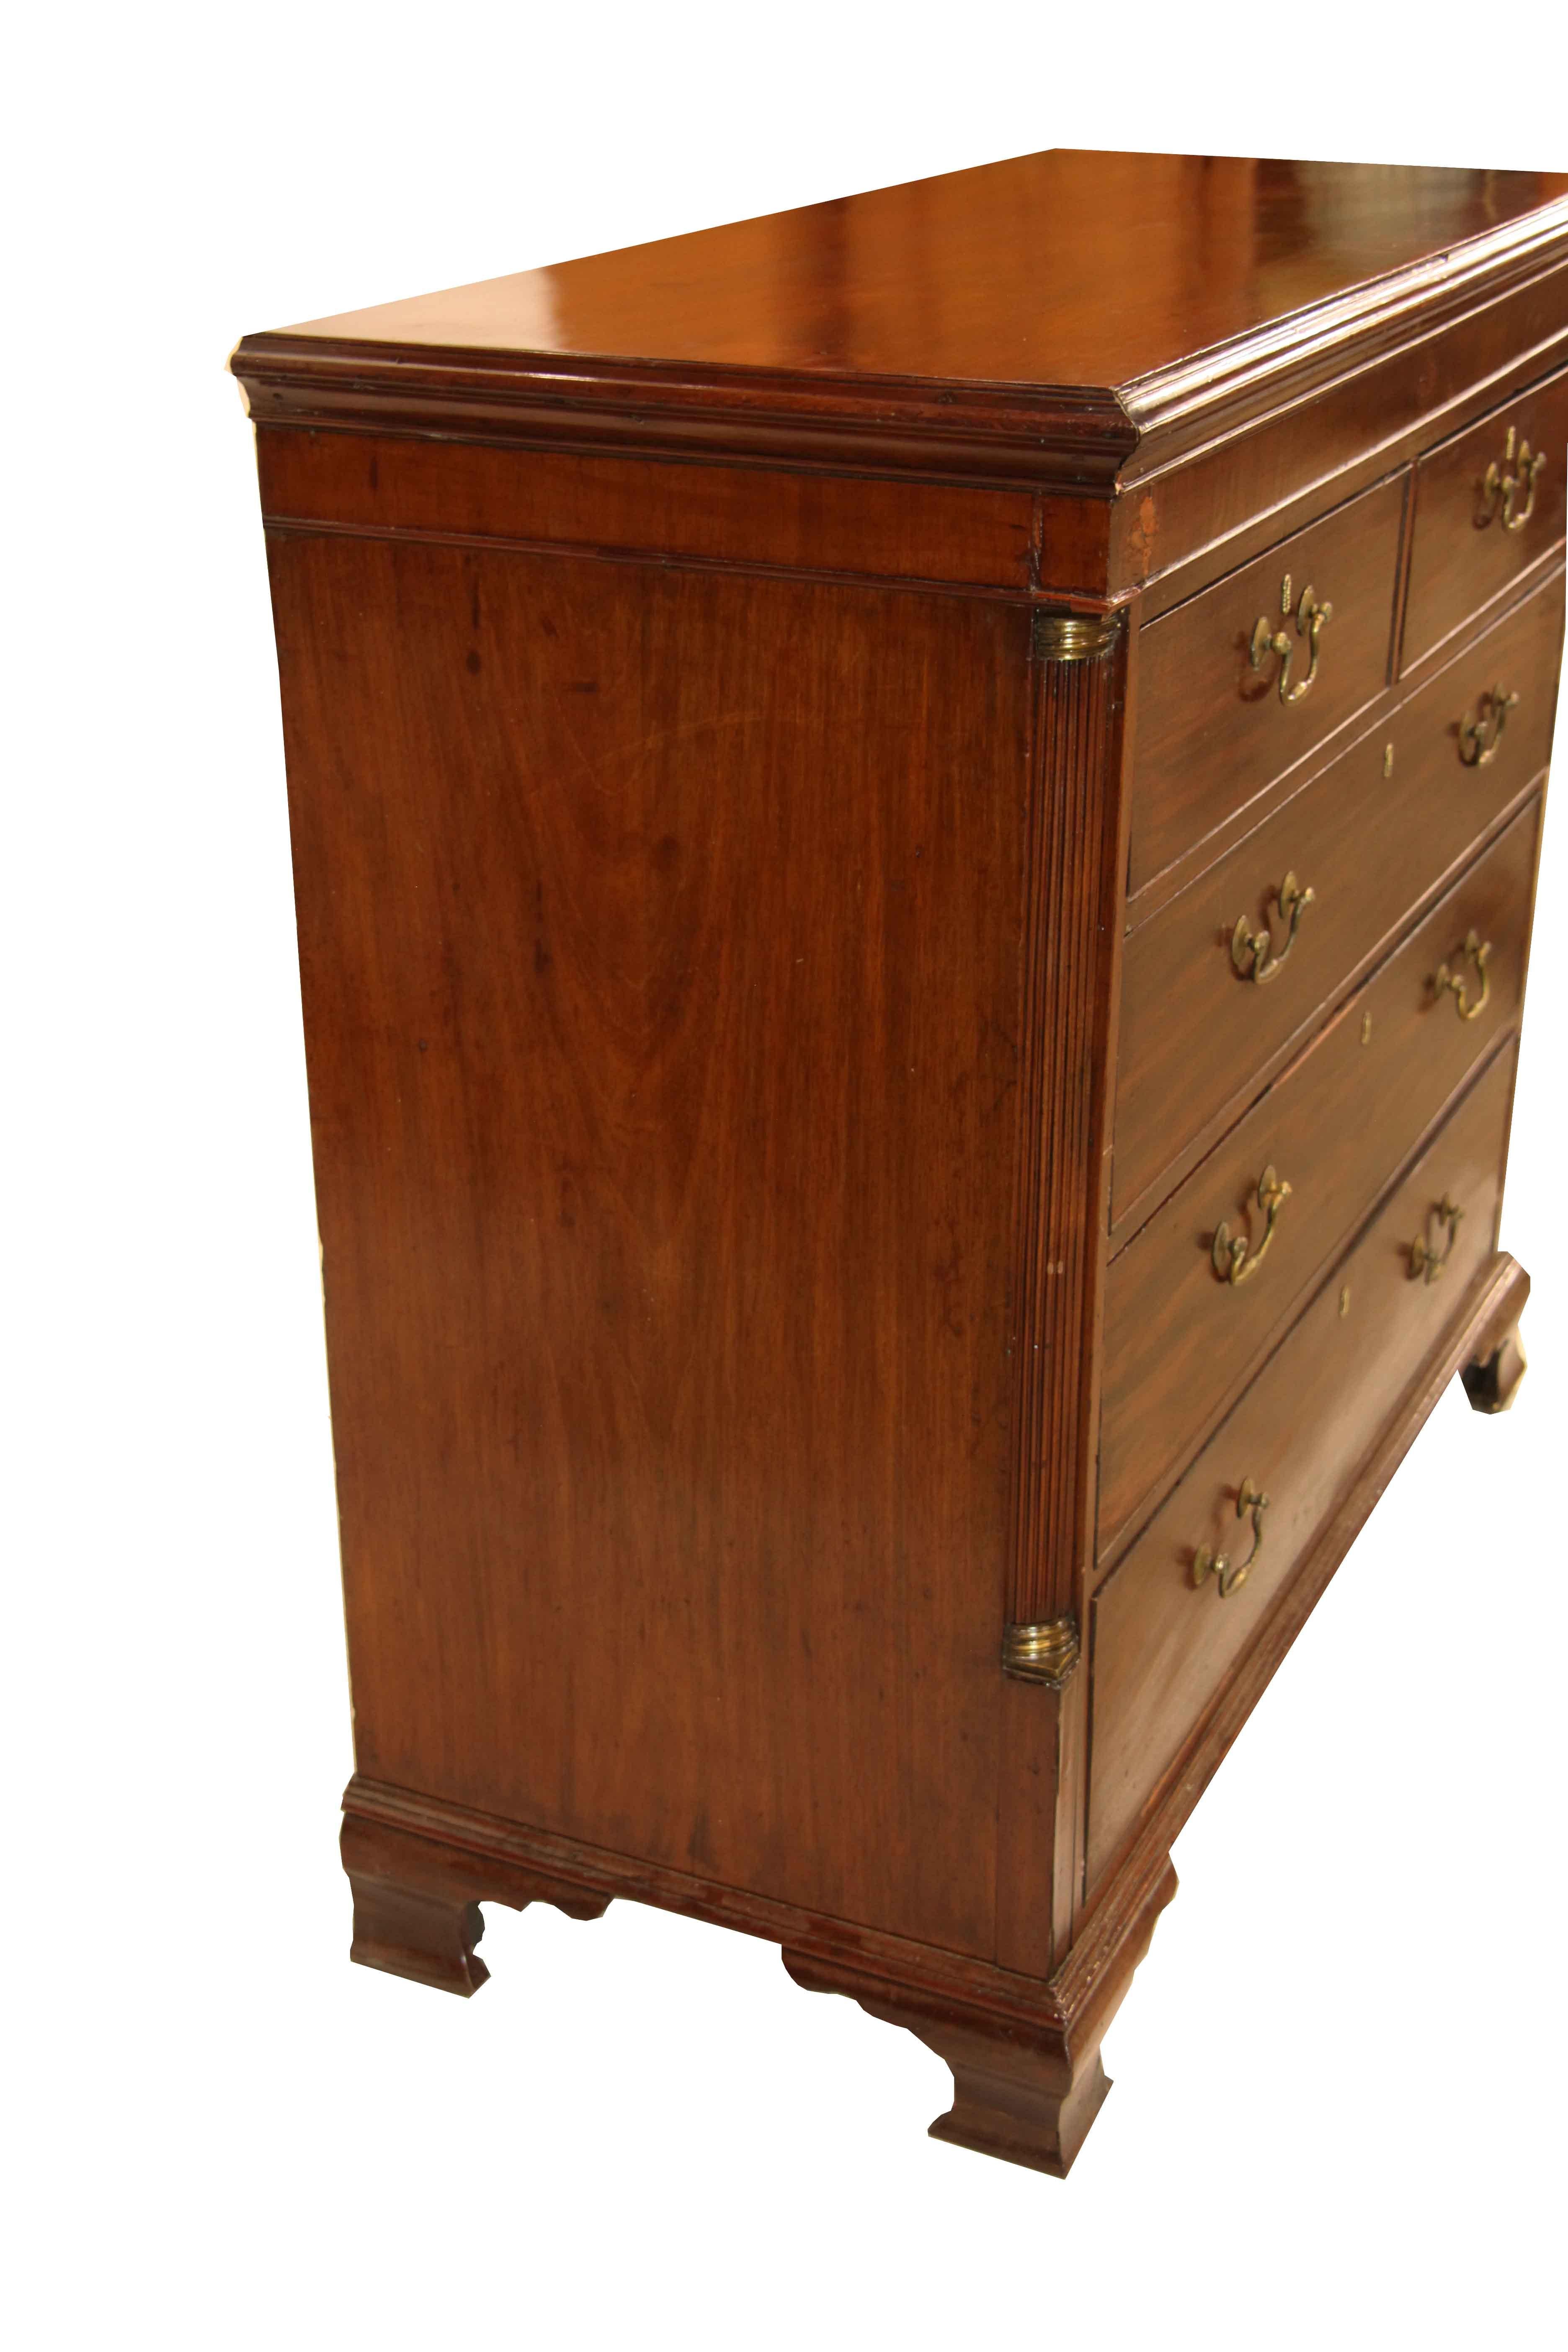 George III mahogany chest of drawers, this chest has a nicely figured top surrounded by a two piece molding above a vertical veneered frieze, on each end (on the front) and in the middle are oval inlaid satinwood medallions. The two over three